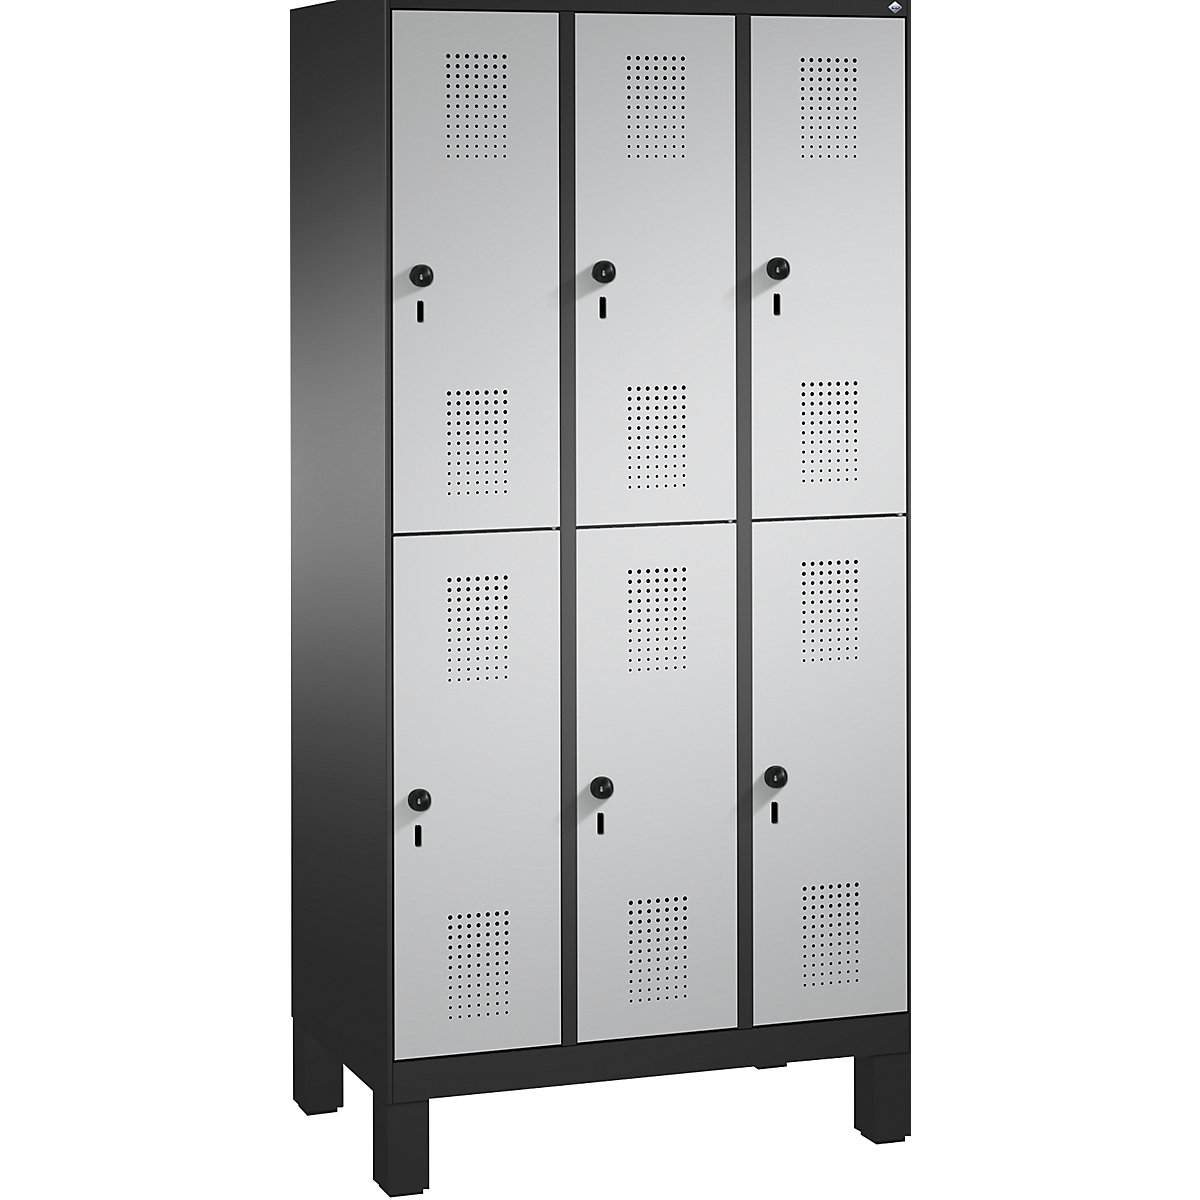 EVOLO cloakroom locker, double tier, with feet – C+P, 3 compartments, 2 shelf compartments each, compartment width 300 mm, black grey / white aluminium-5